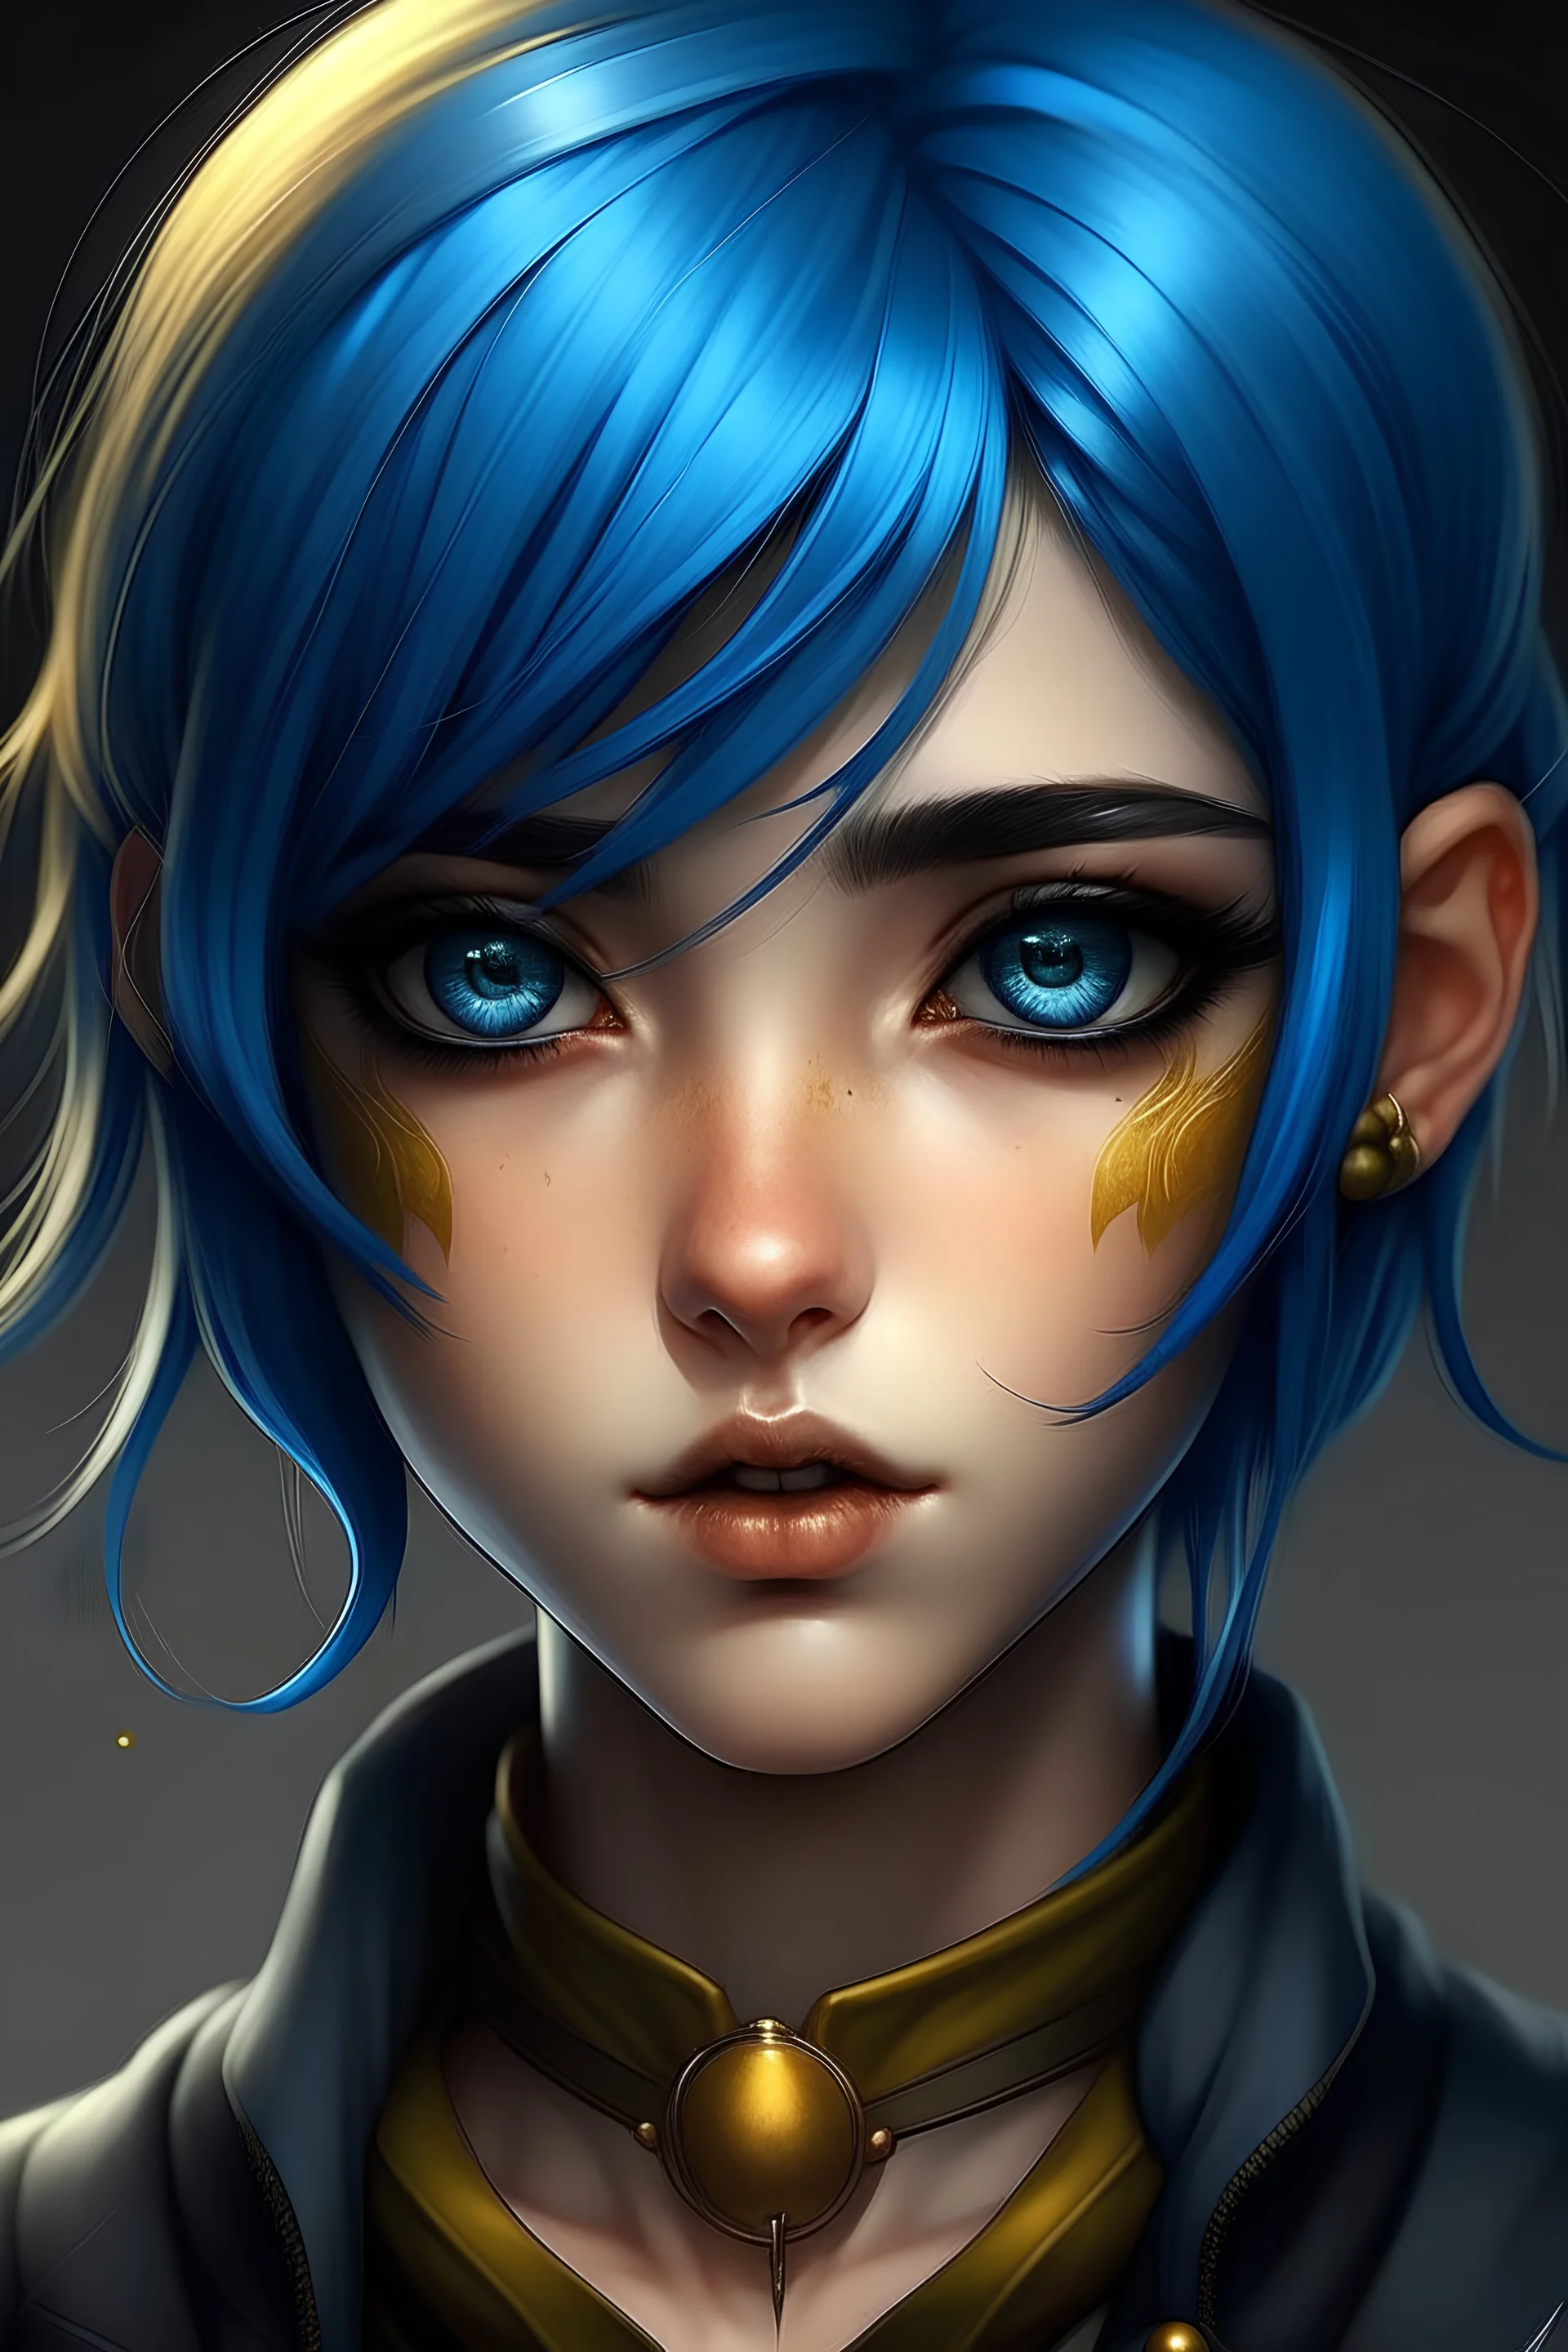 Realistic anime art style. A eye-catchingly dressed blue-haired college girl. Her left nostril is pierced with a large black steel stud. Her eyes are marked with black eyeliner. Her lips are painted with matte black lipstick. She has gold-beige skin and brown eyes, and her short electric blue hair is neatly combed. She is wearing a fitted black button-up shirt, a mid-length white skirt, and dark blue combat boots with black laces